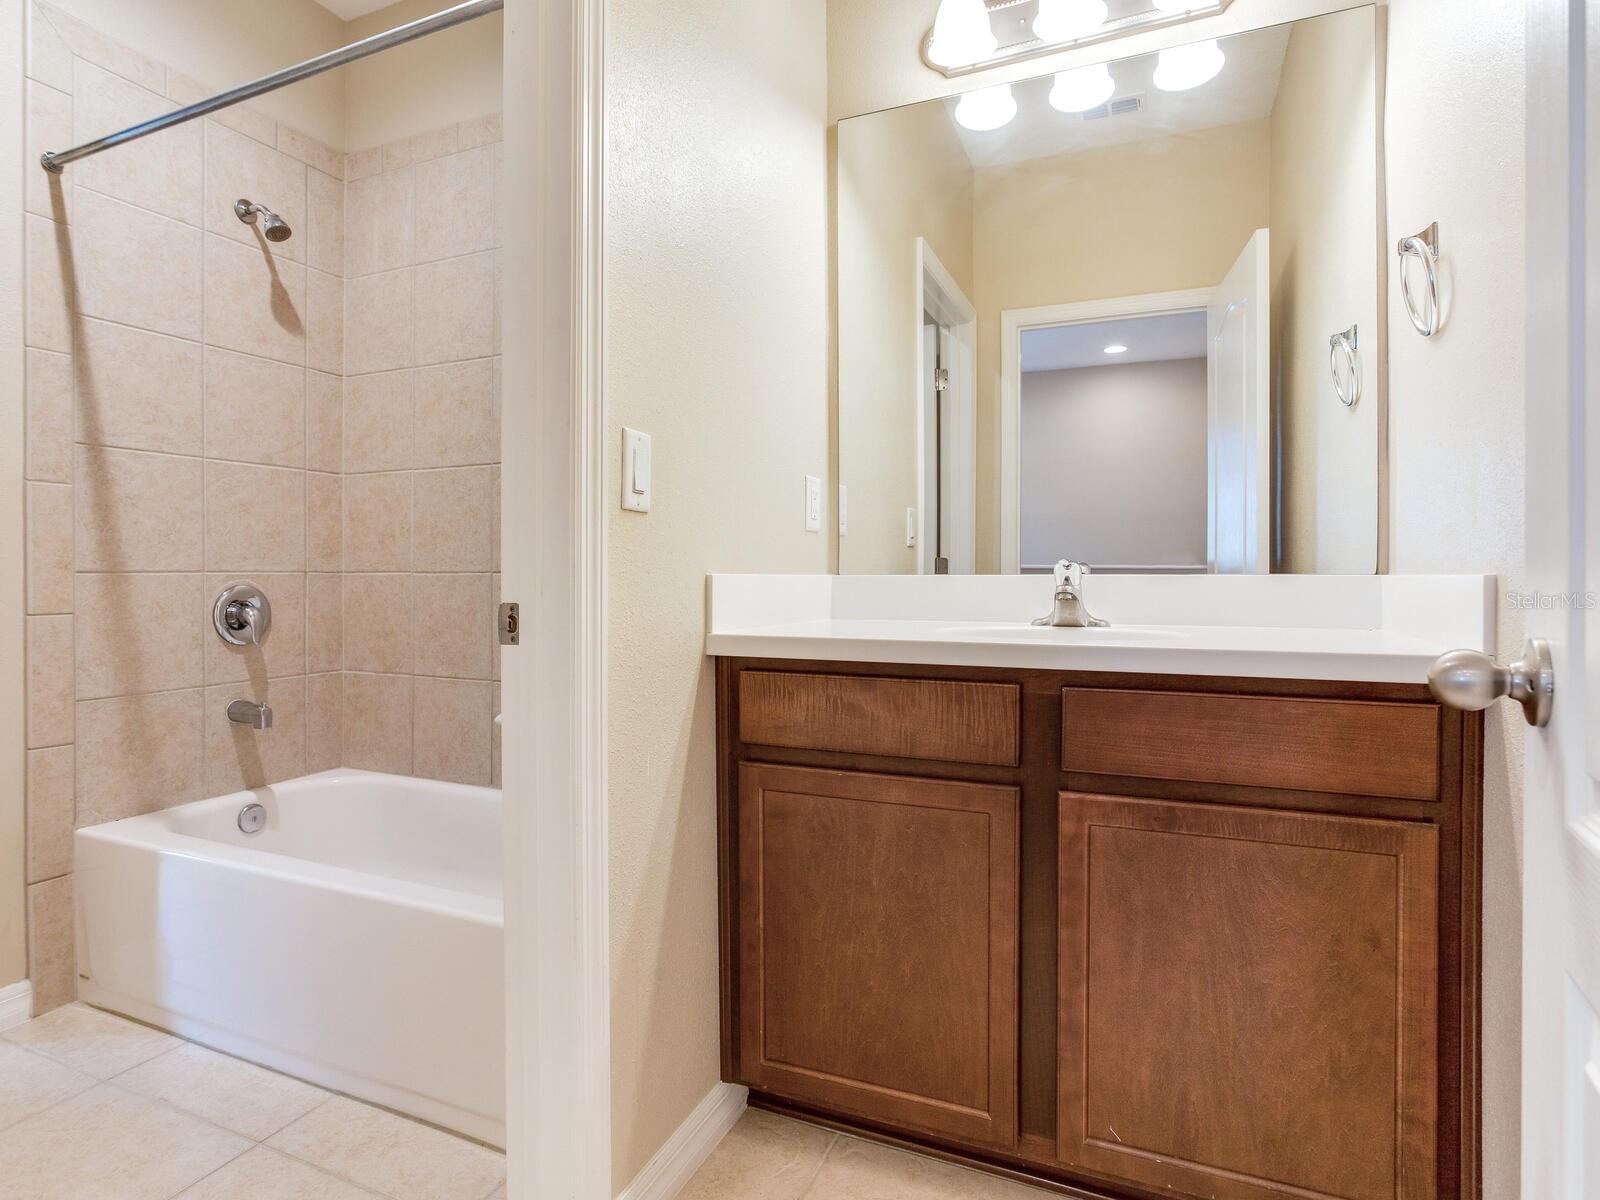 Jack and Jill Bathroom connected to two separate vanity rooms for each room